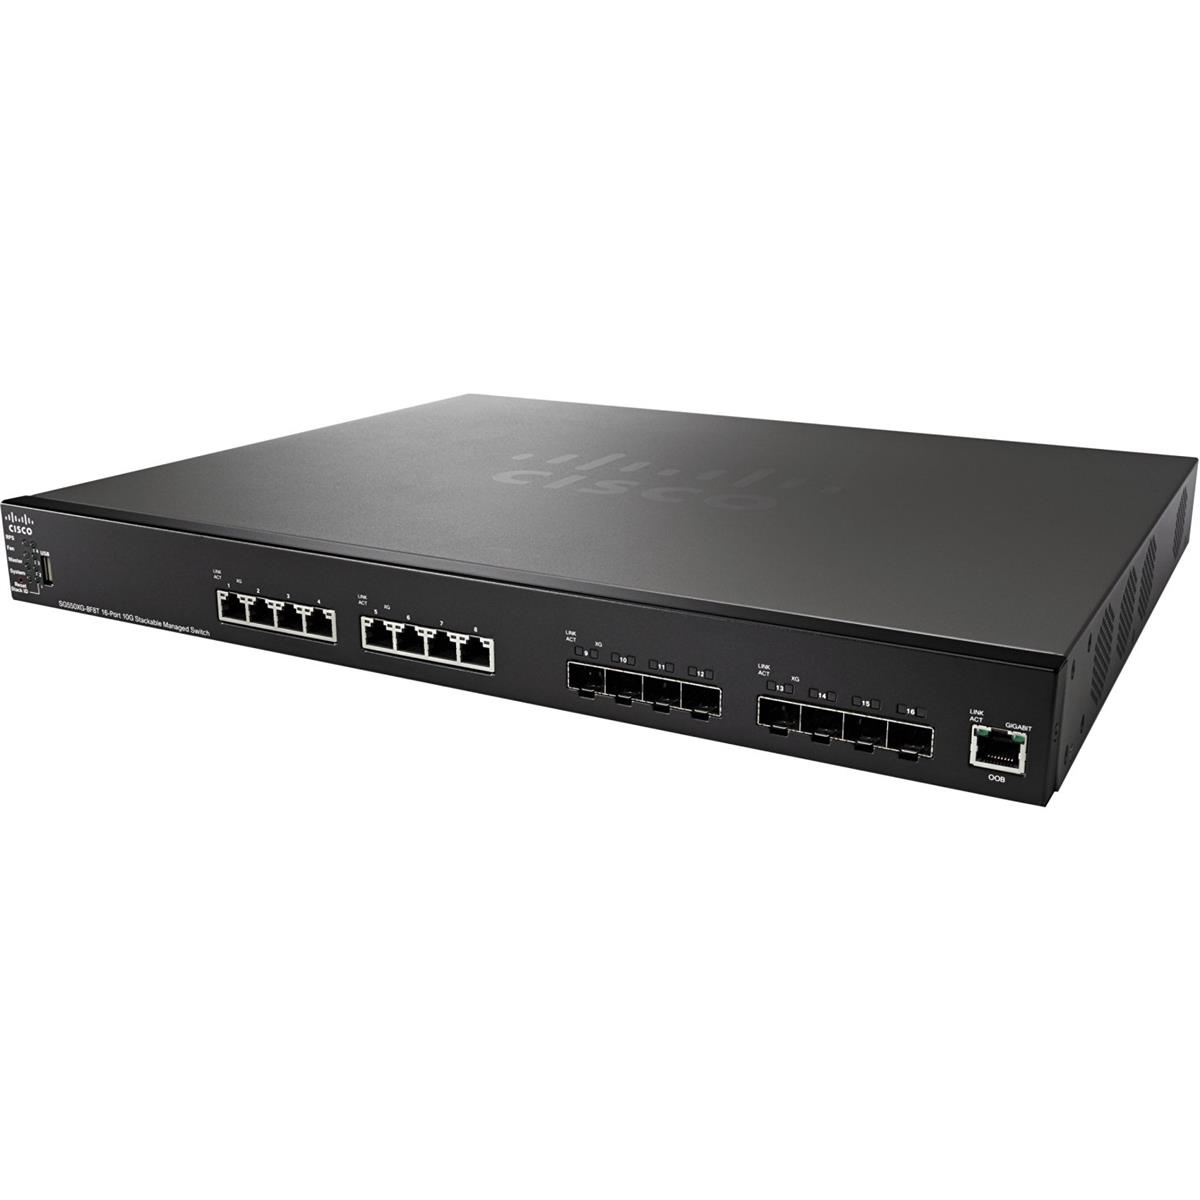 Image of Cisco SG550XG-8F8T 16 Port 10G Stackable Managed Switch